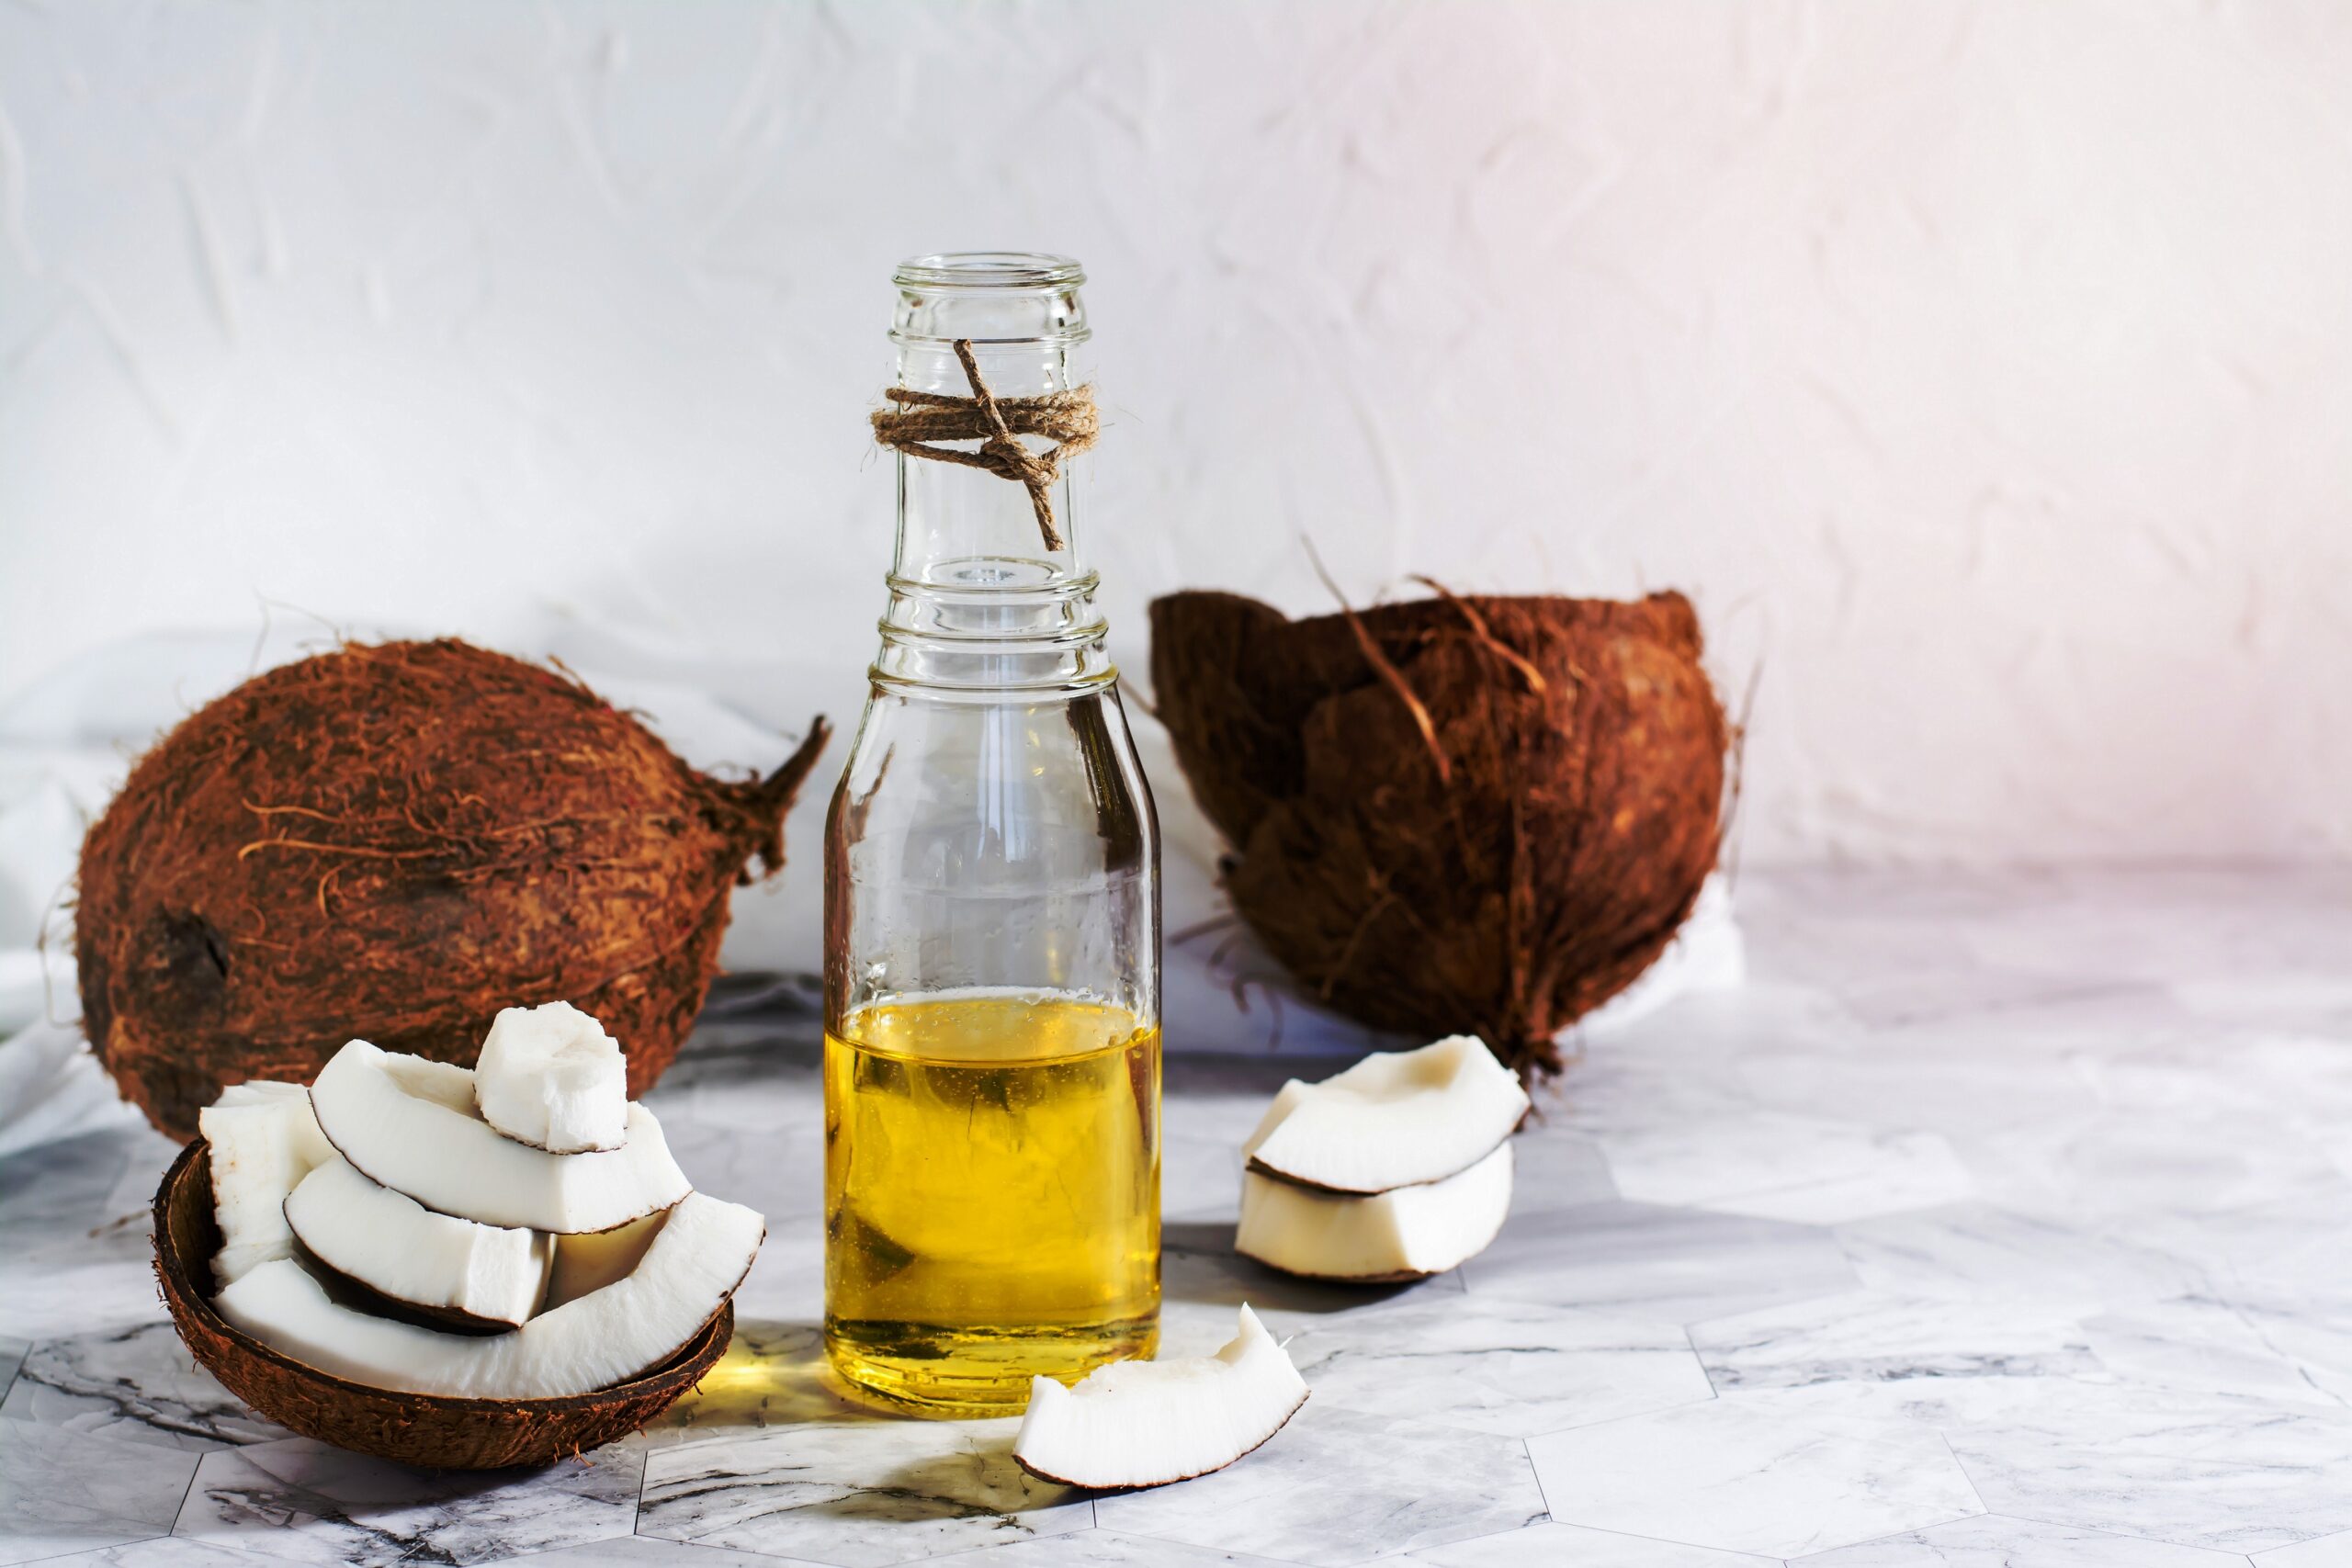 Coconut oil can lead to obesity